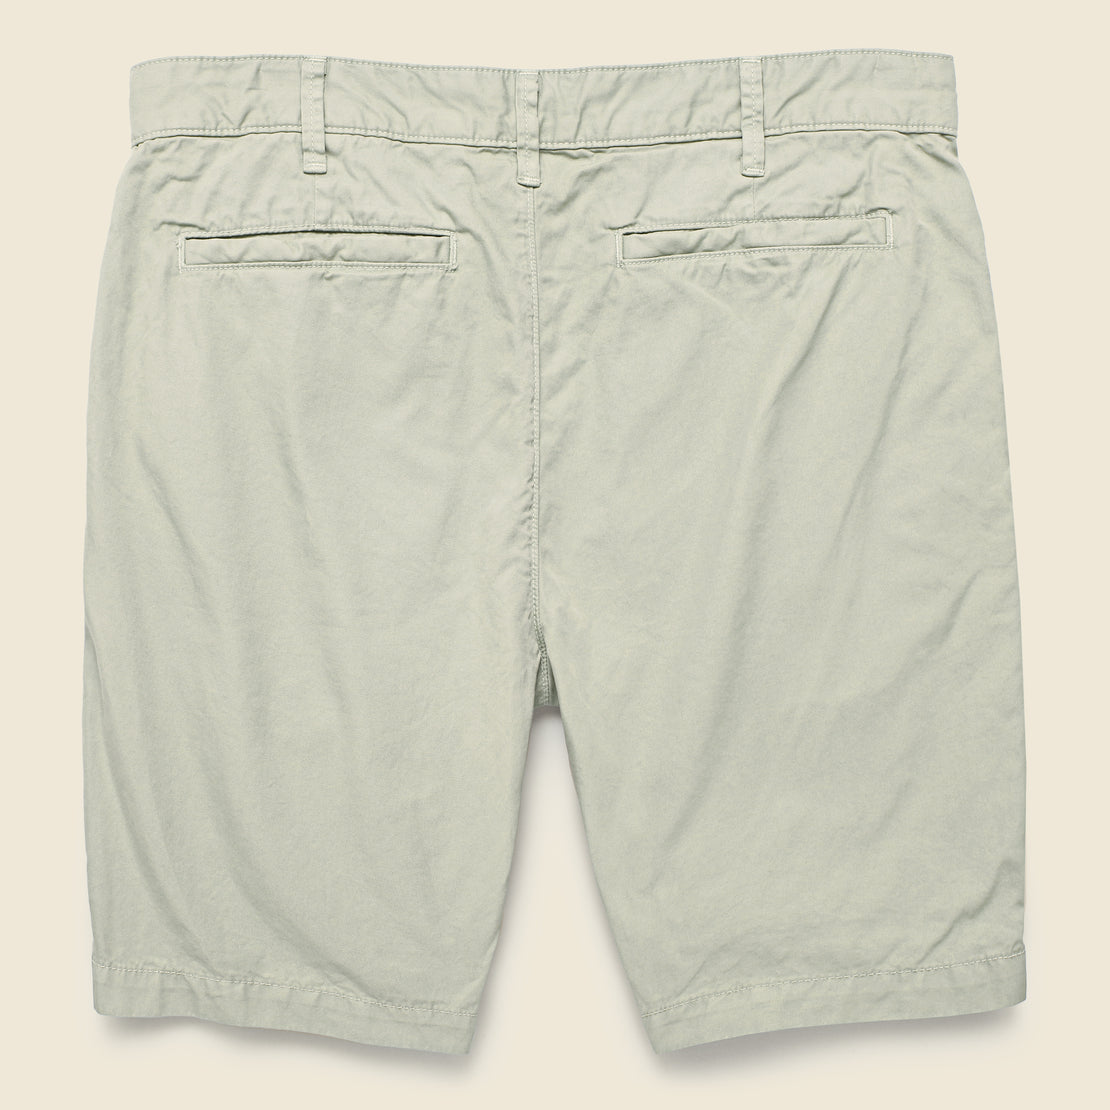 8-inch Twill Bermuda Short - Cement - Save Khaki - STAG Provisions - Shorts - Solid